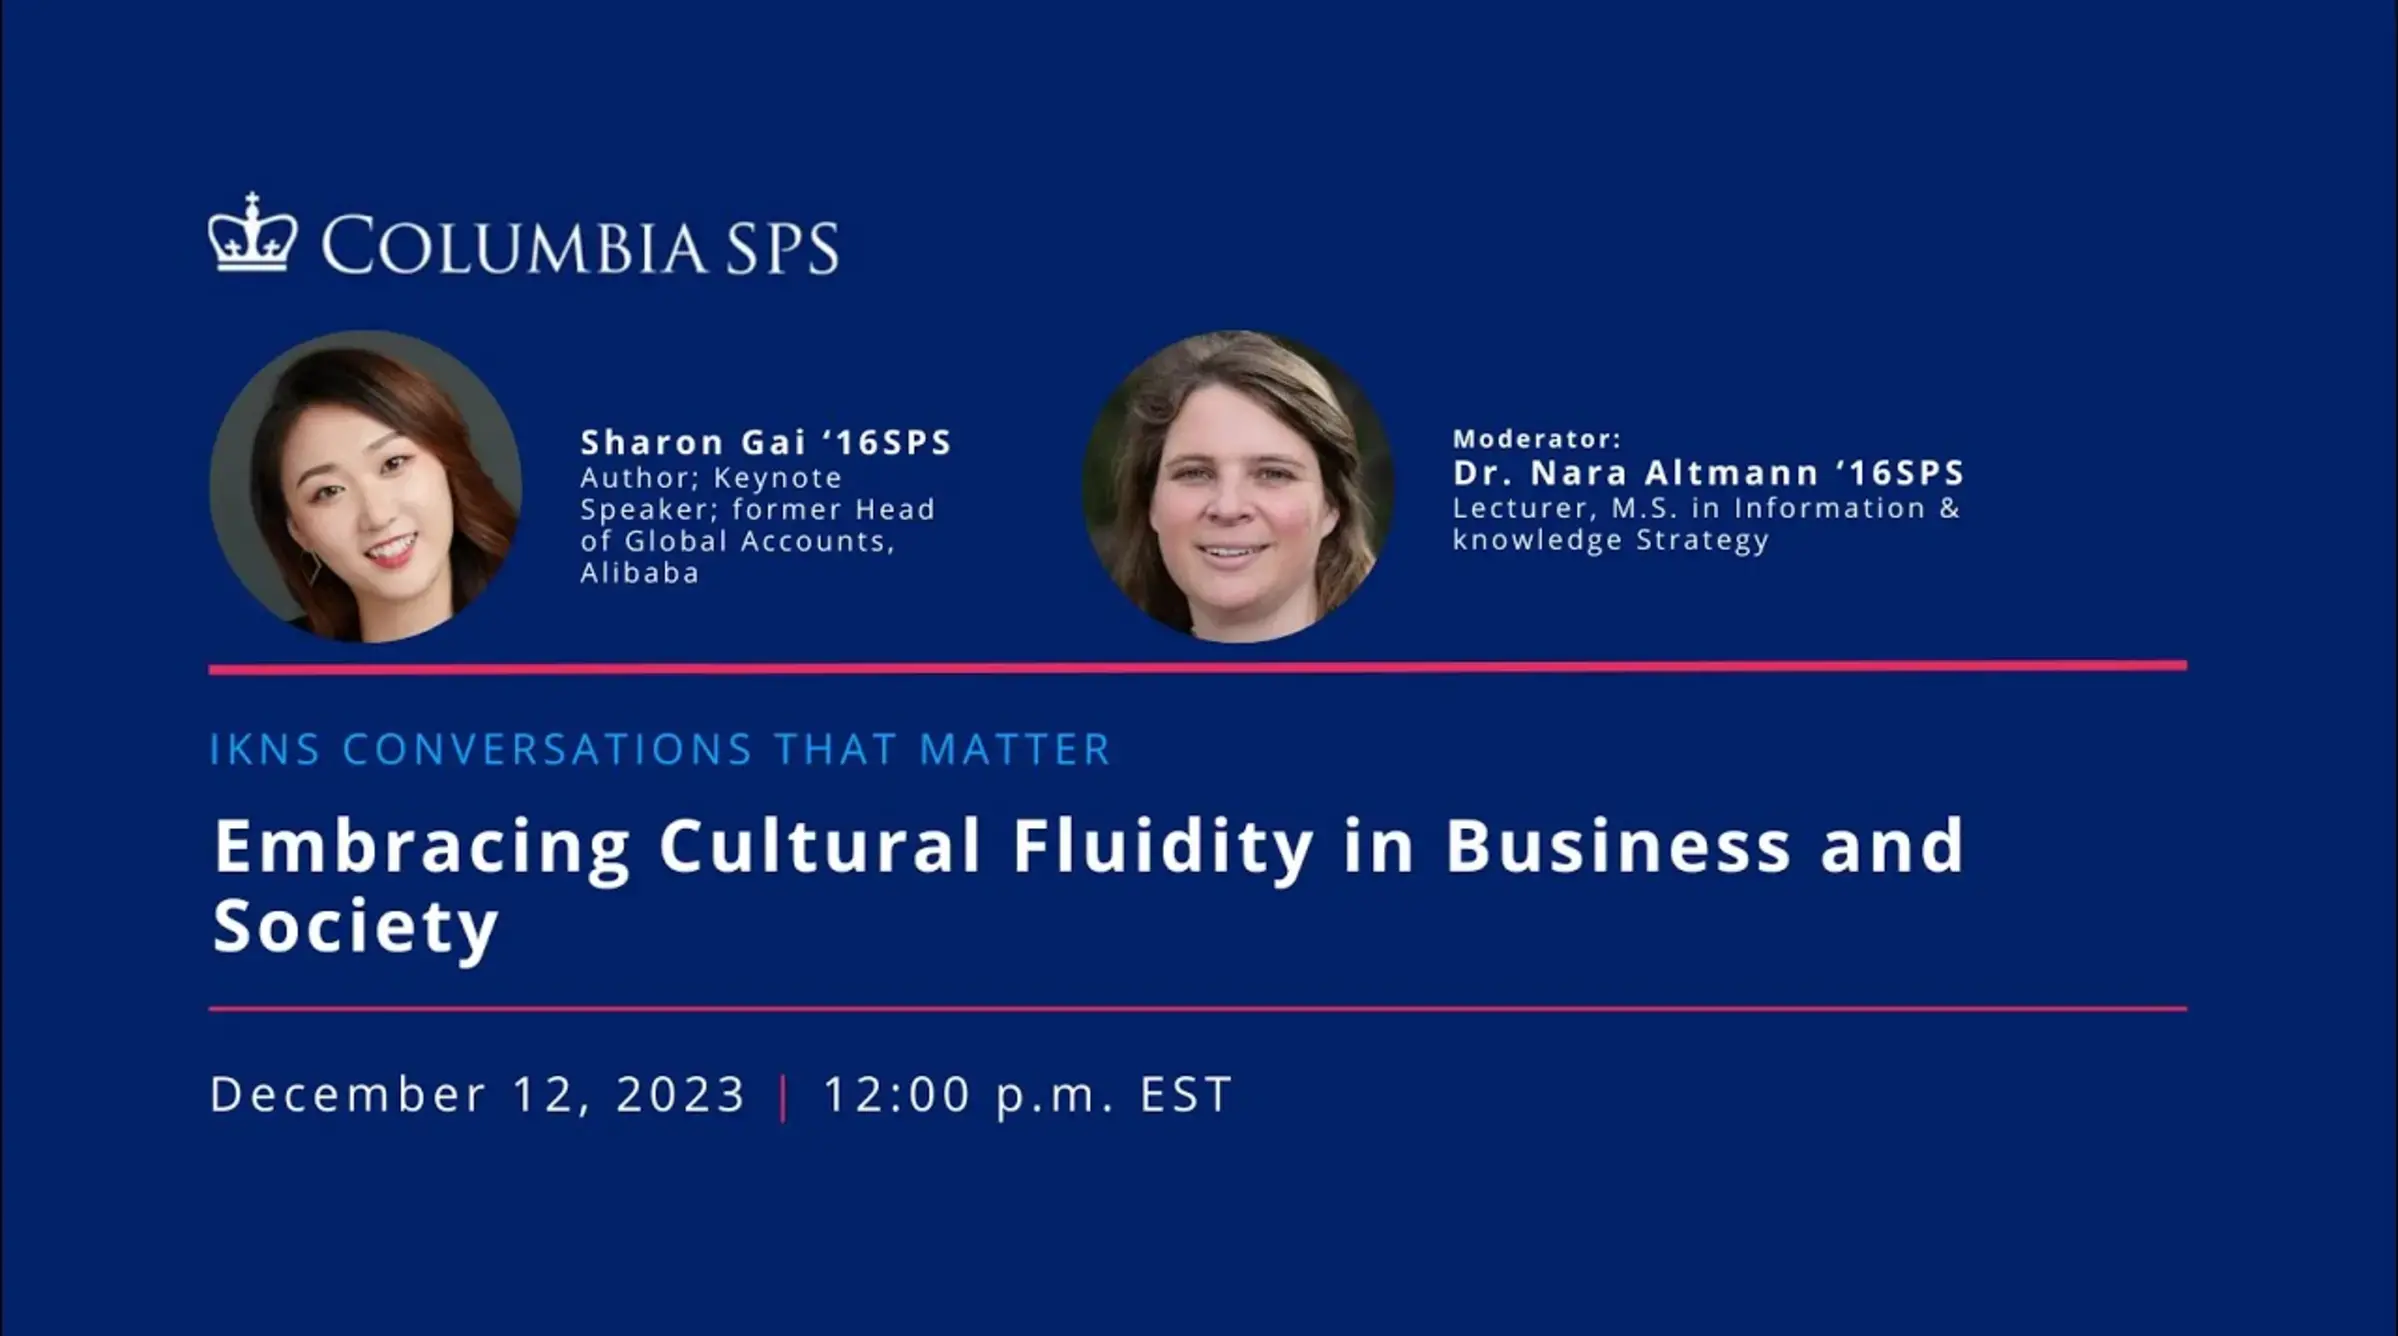 IKNS Conversations That Matter: Embracing Cultural Fluidity in Business and Society